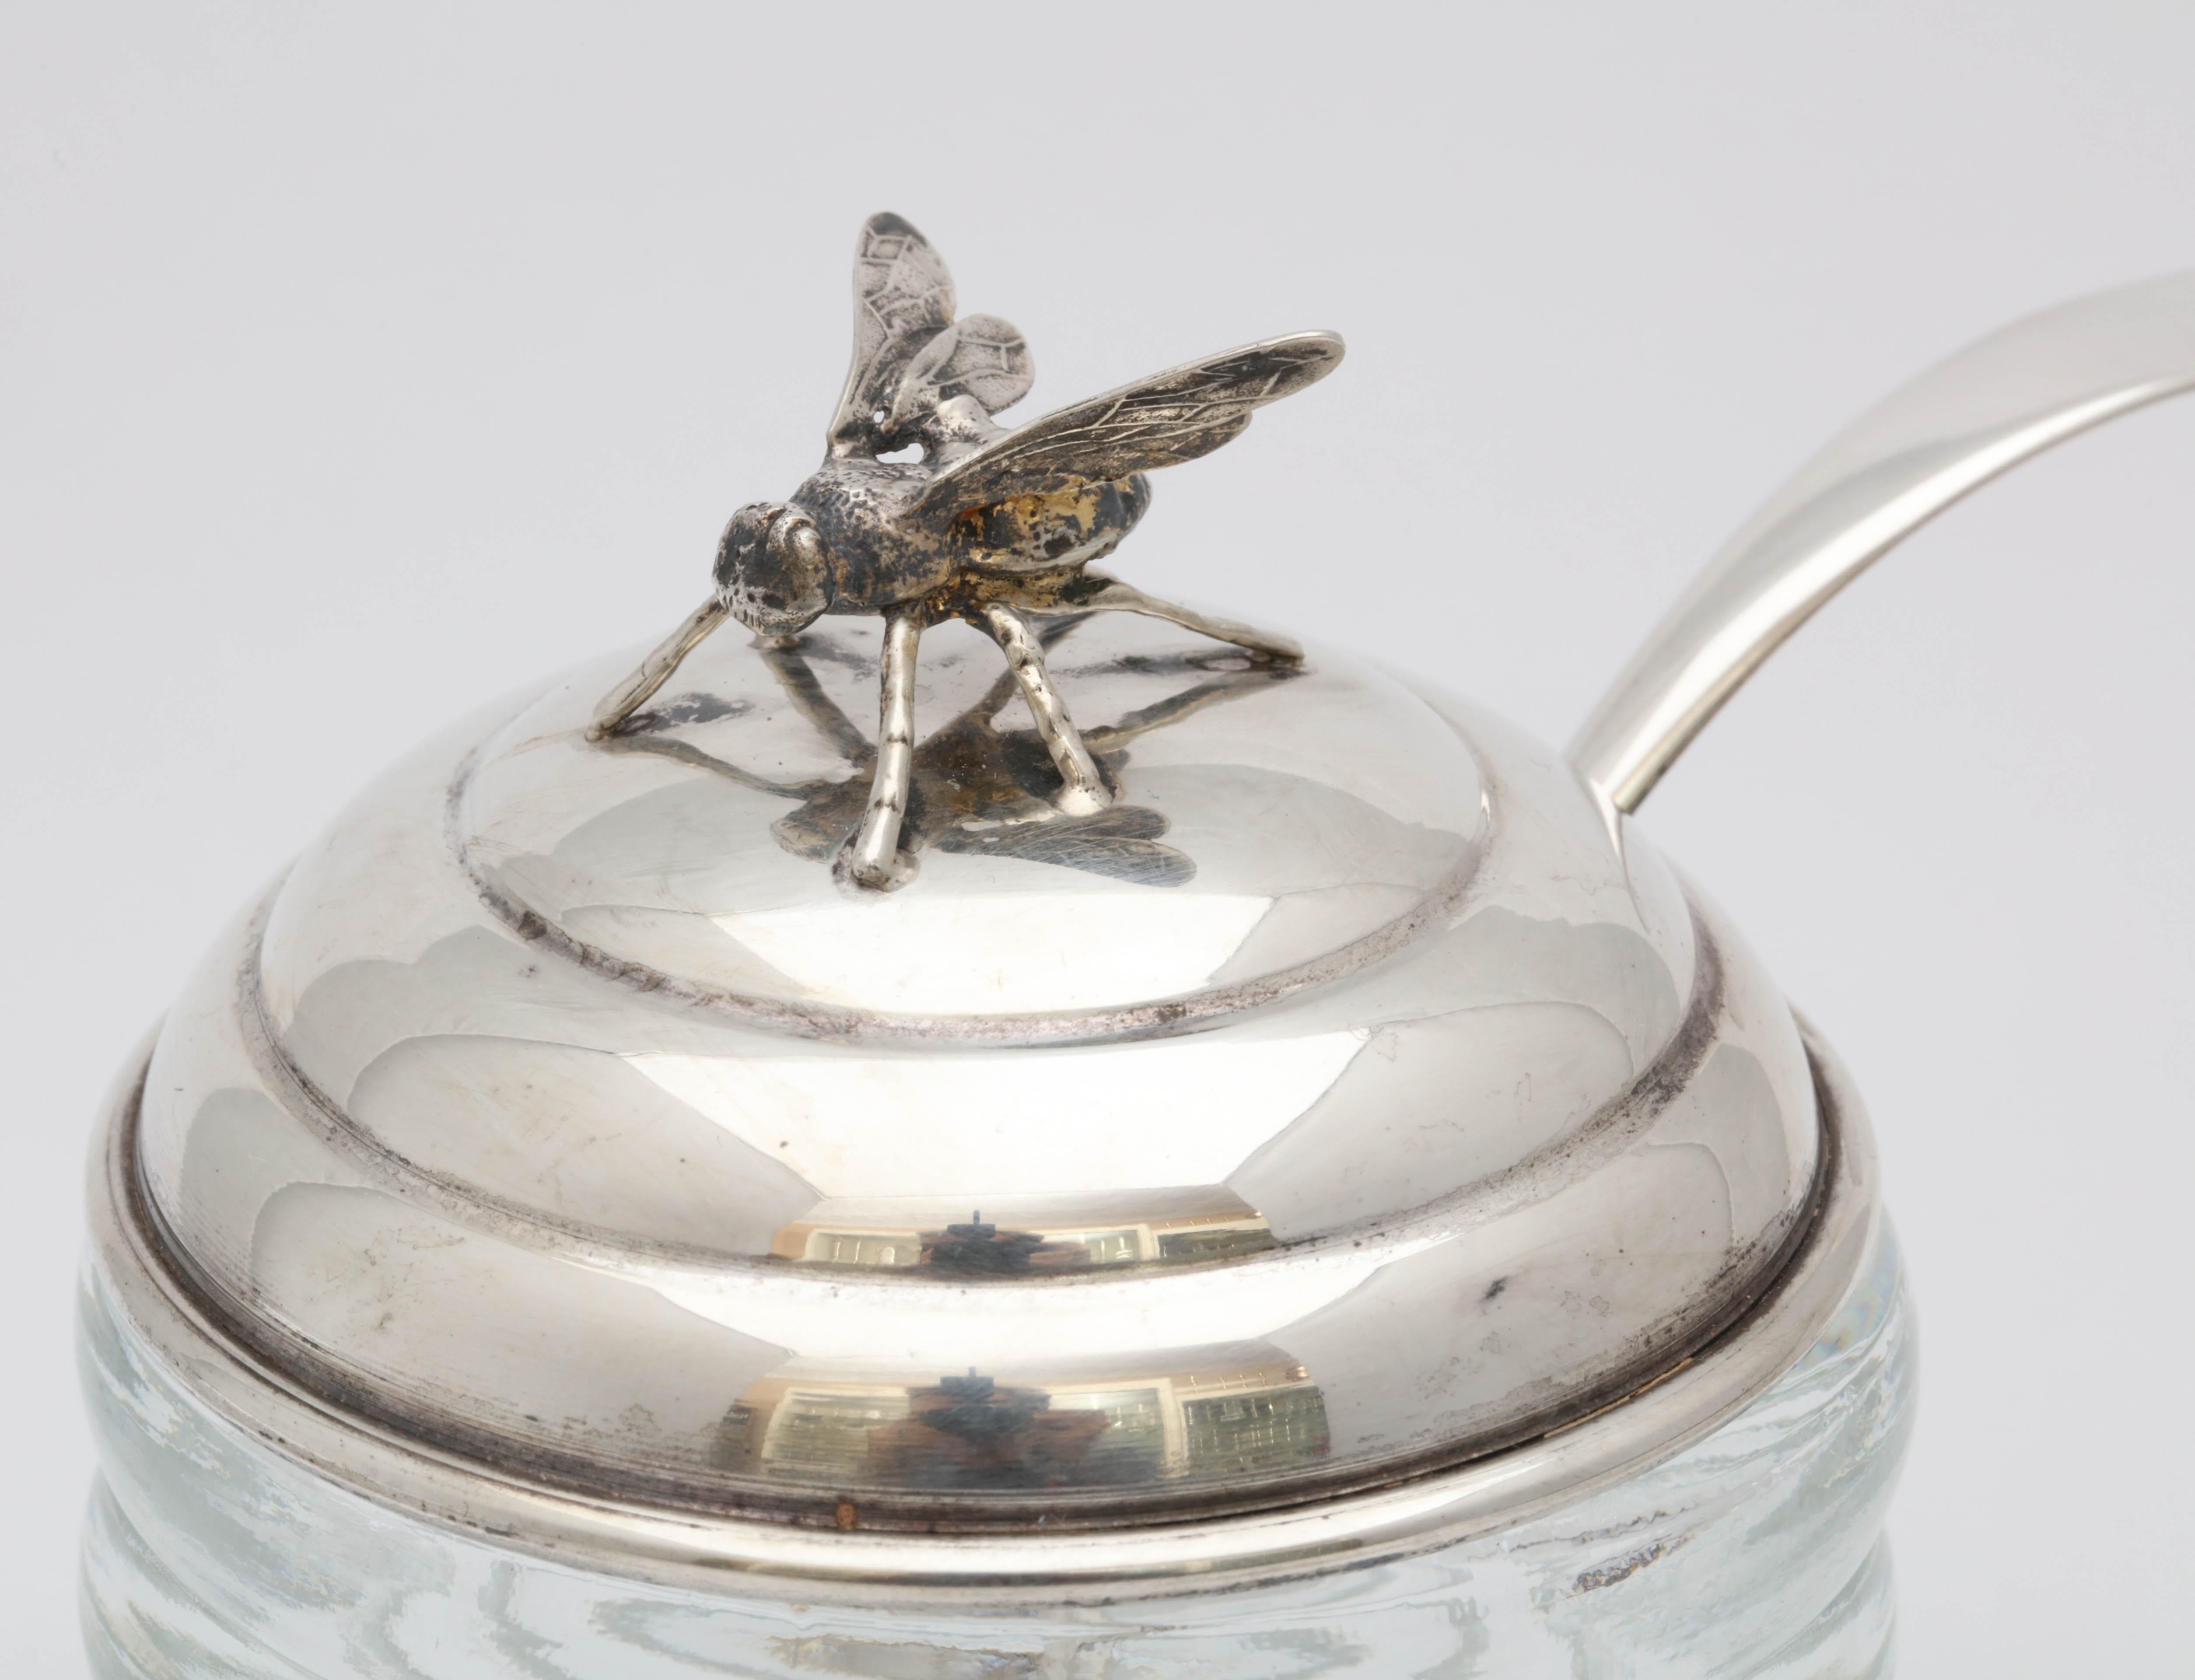 Unusual, Art Deco, sterling silver, mounted honey jar with original spoon, R. Blackinton and Co., No. Attleboro, Mass, circa 1930s. Glass is beehive-form; sterling silver lid is topped by a honey bee. Measures: 4 1/2 inches high (to top of honeybee